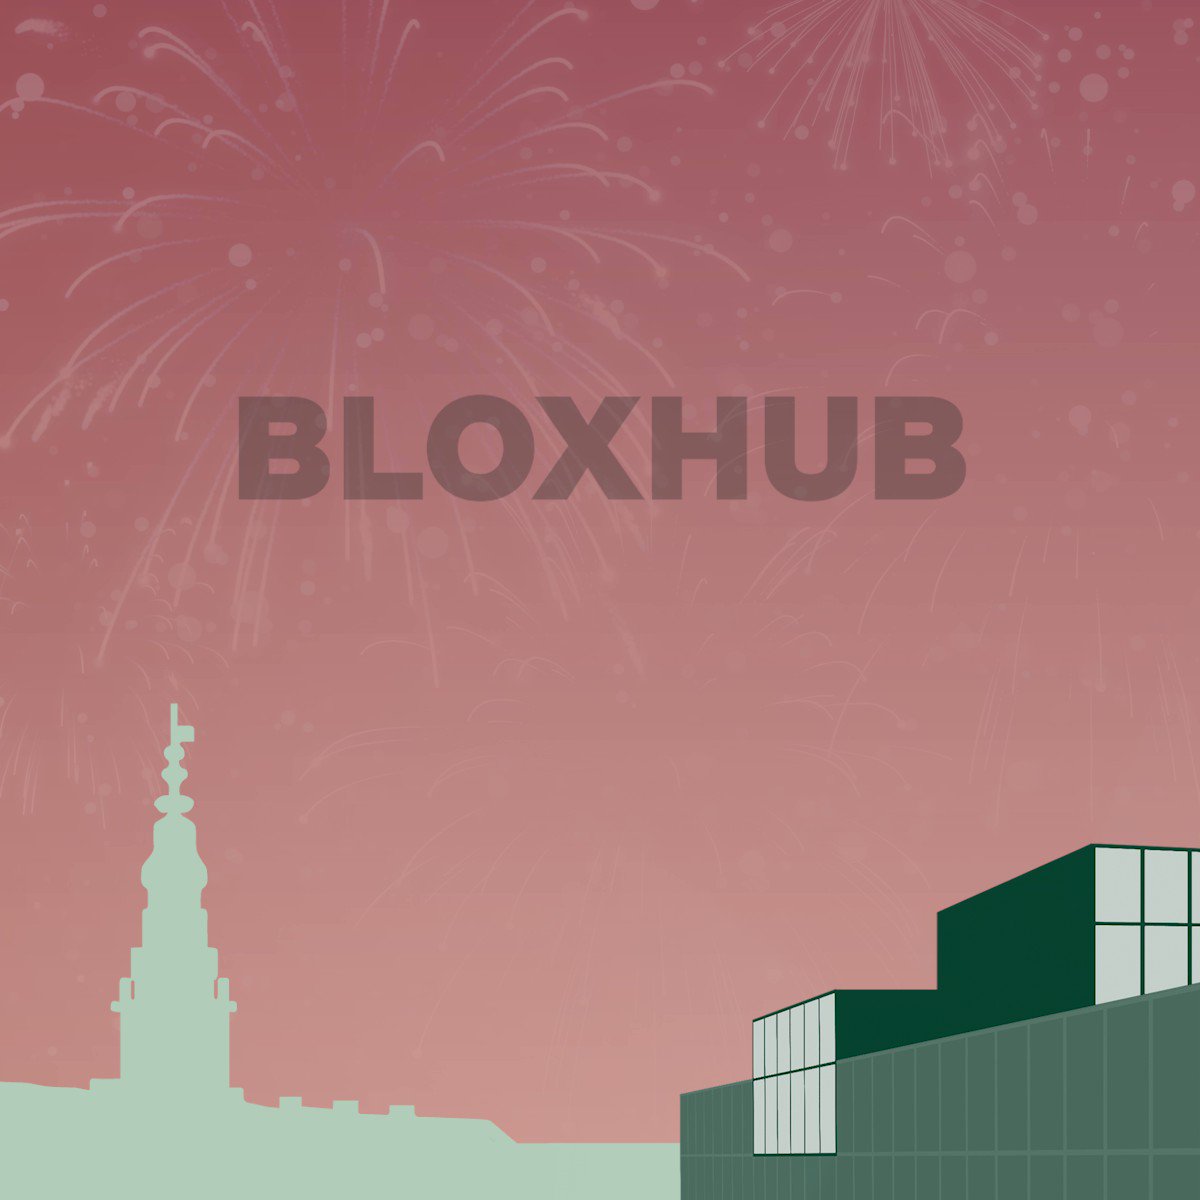 Make way for 2022! As the new year draws close, we hope it's filled with the promises of a sustainable and hopeful tomorrow. Wishing you a sparkling New Year from the BLOXHUB team. 

#happy2022 #newhorizons